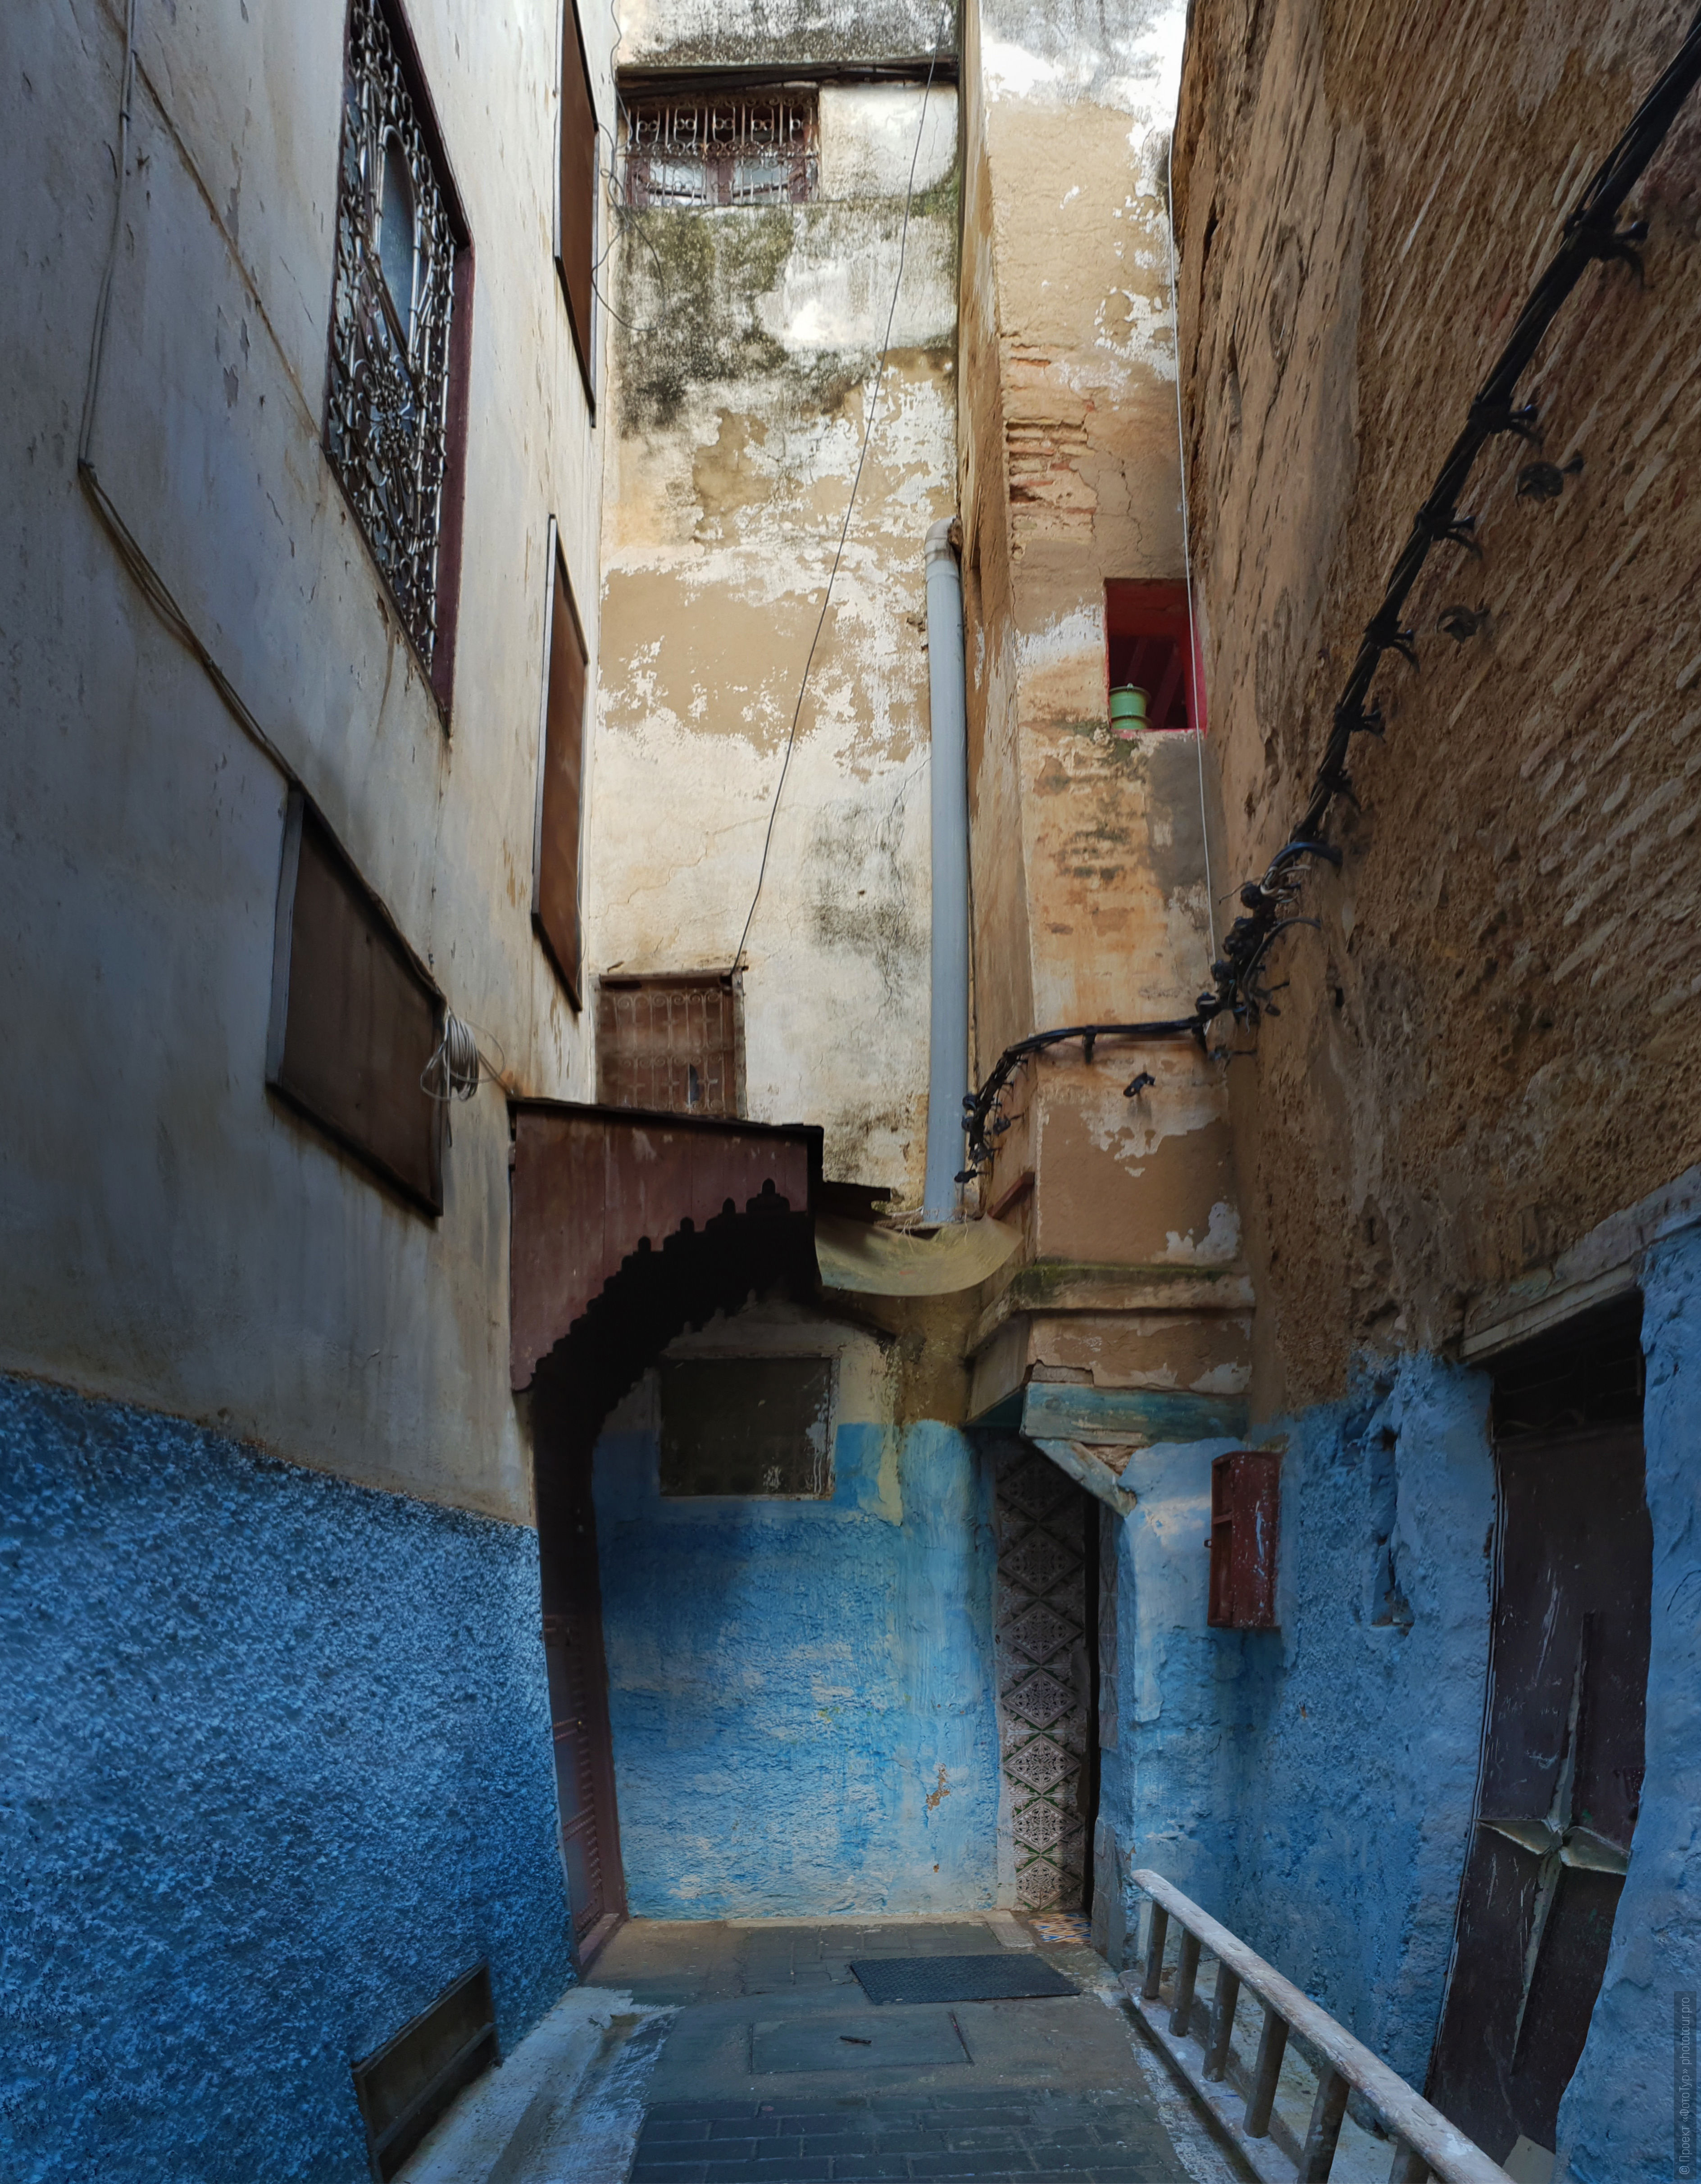 The wells of the stone houses of the medina of Fes. Adventure photo tour: medina, cascades, sands and ports of Morocco, April 4 - 17, 2020.